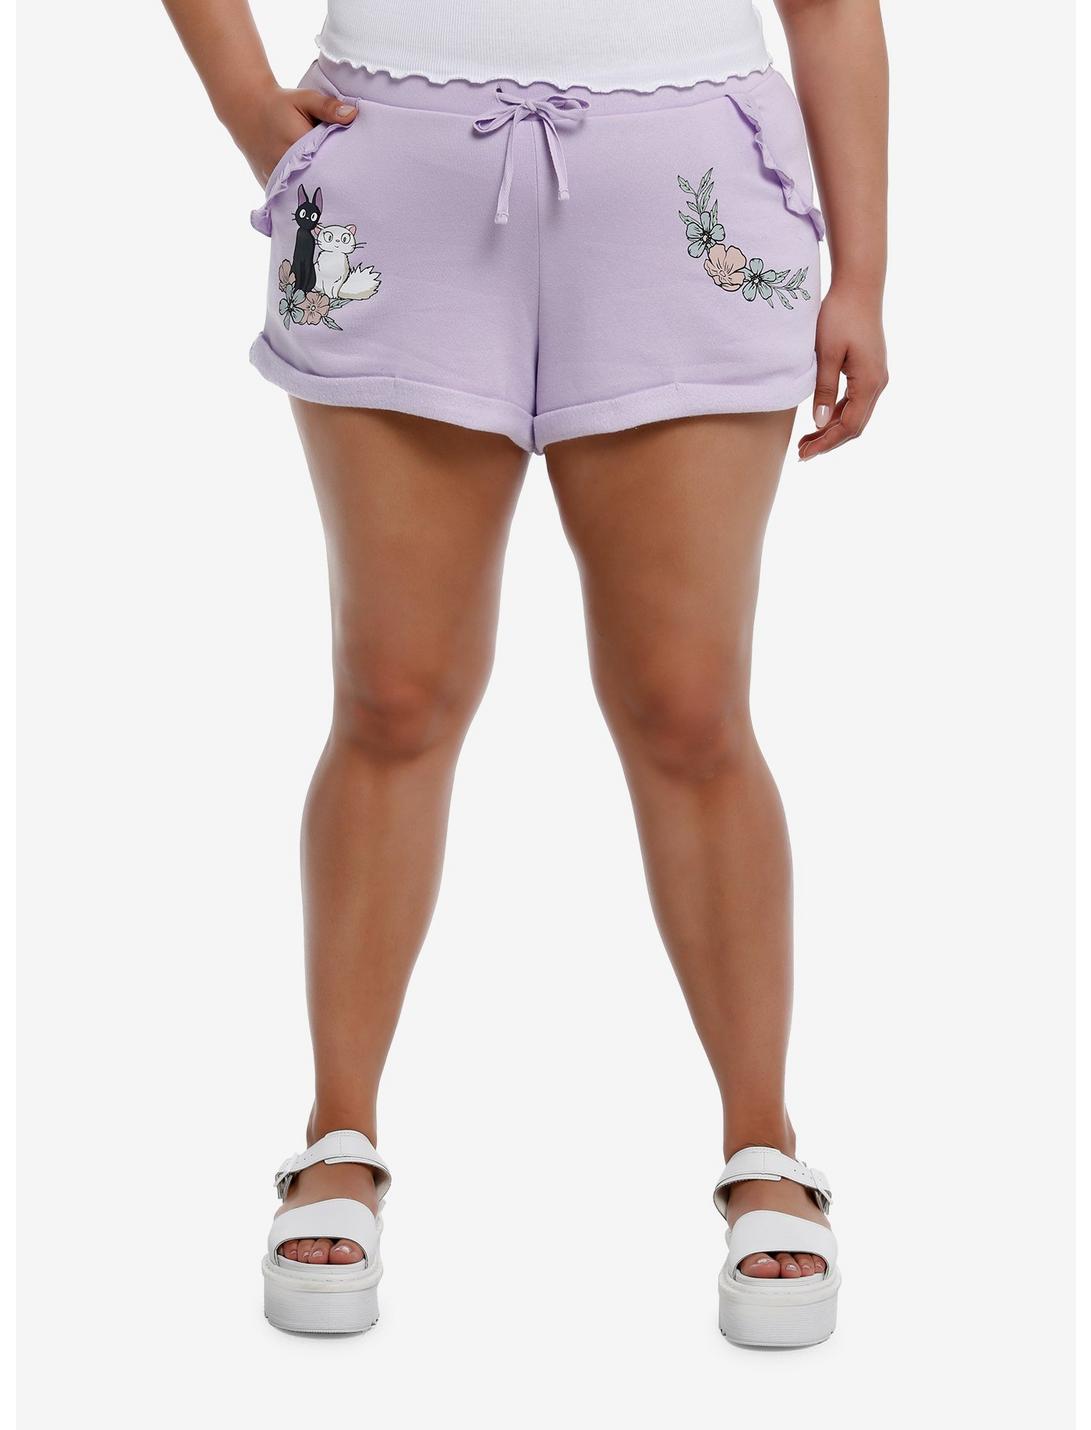 Her Universe Studio Ghibli Kiki's Delivery Service Cats Lounge Shorts Plus Size, LILAC, hi-res